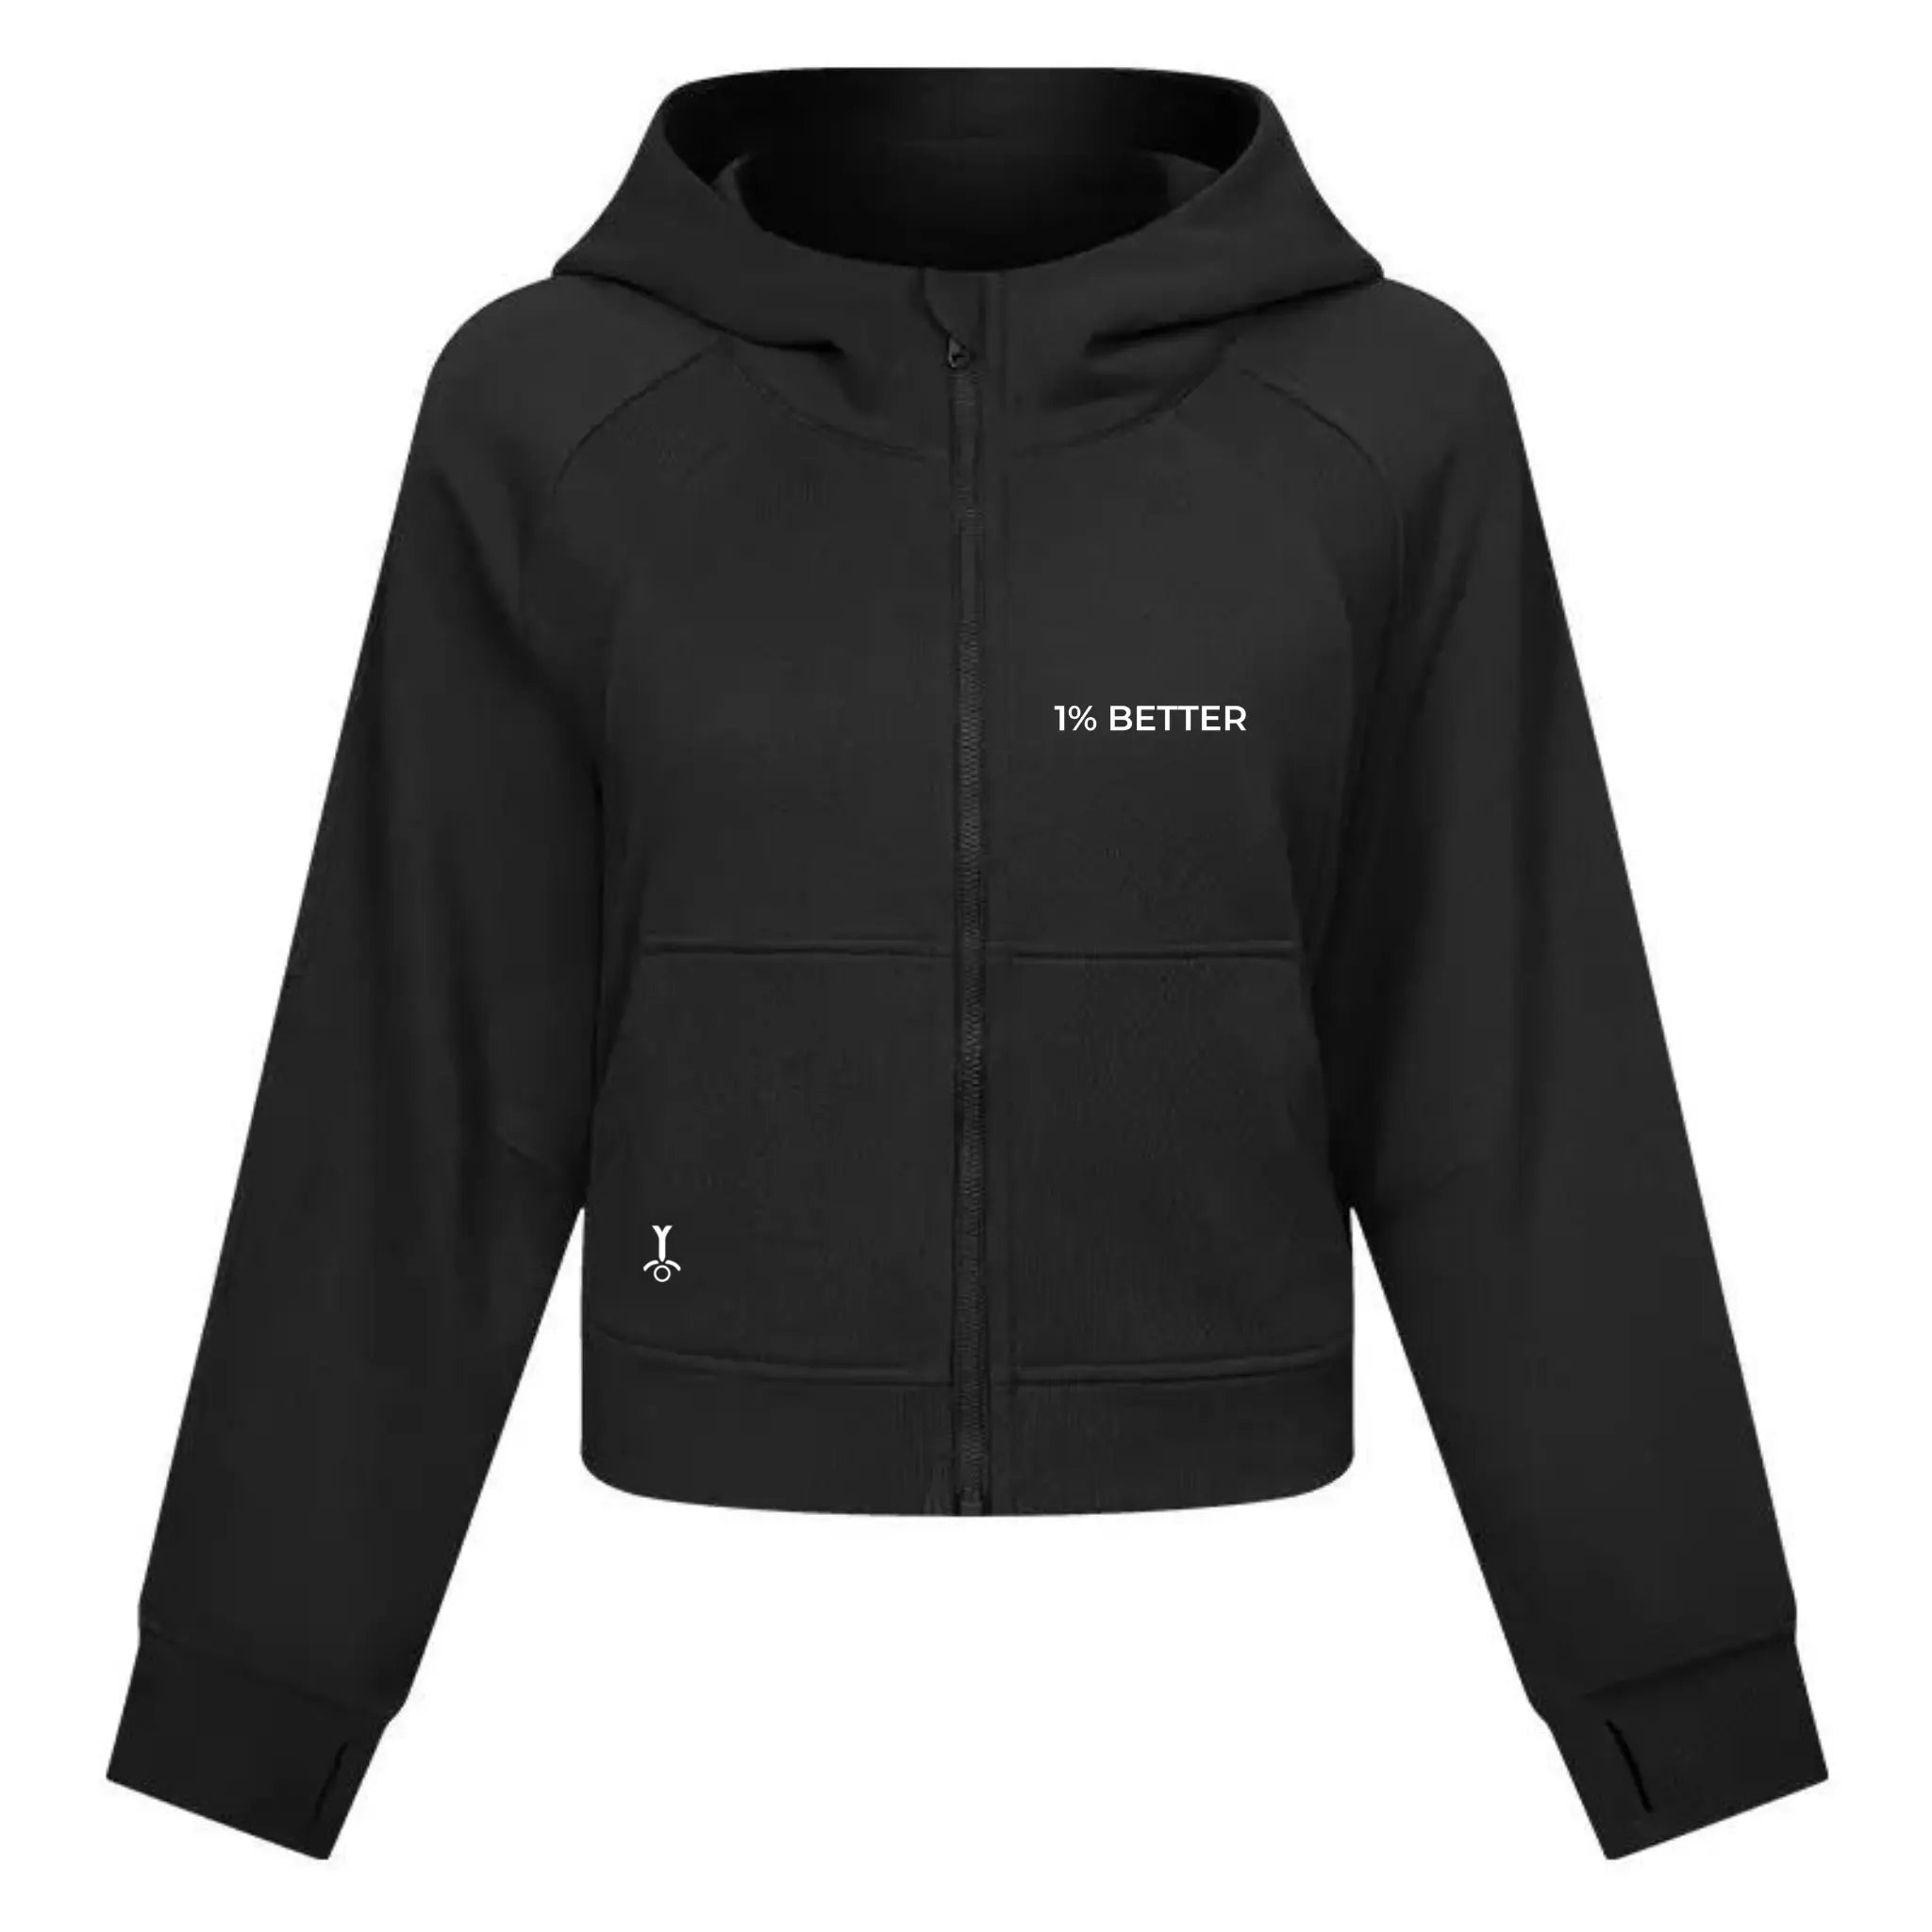 A zip jacket to keep you warm and stylish otw to the gym